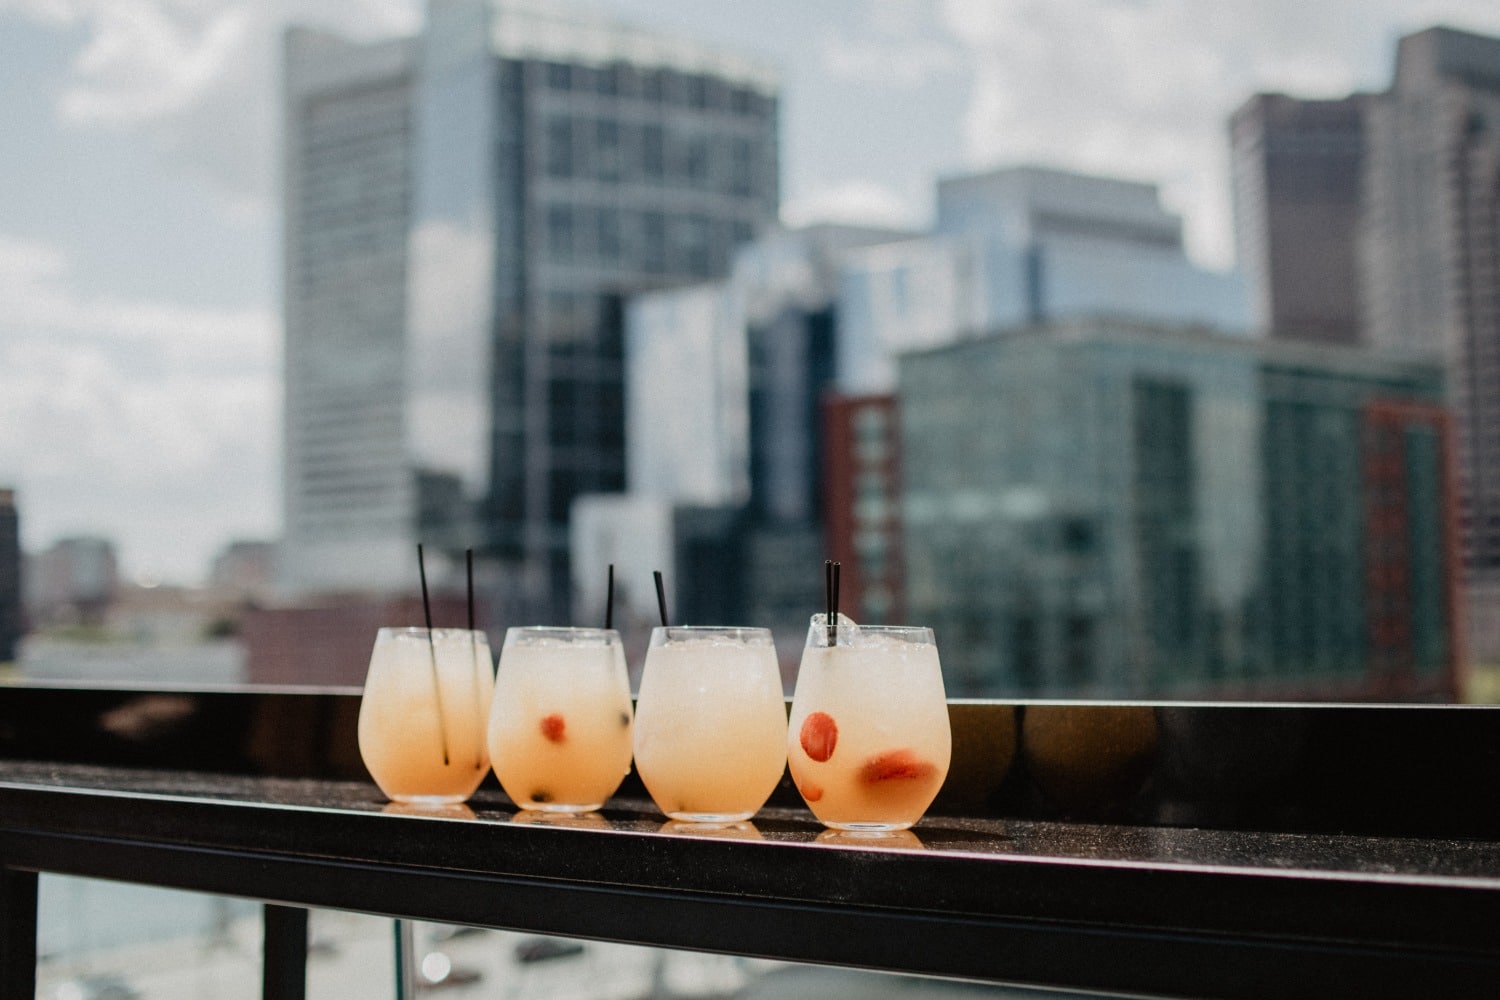 4 cocktails on rooftop bar with skyline in background